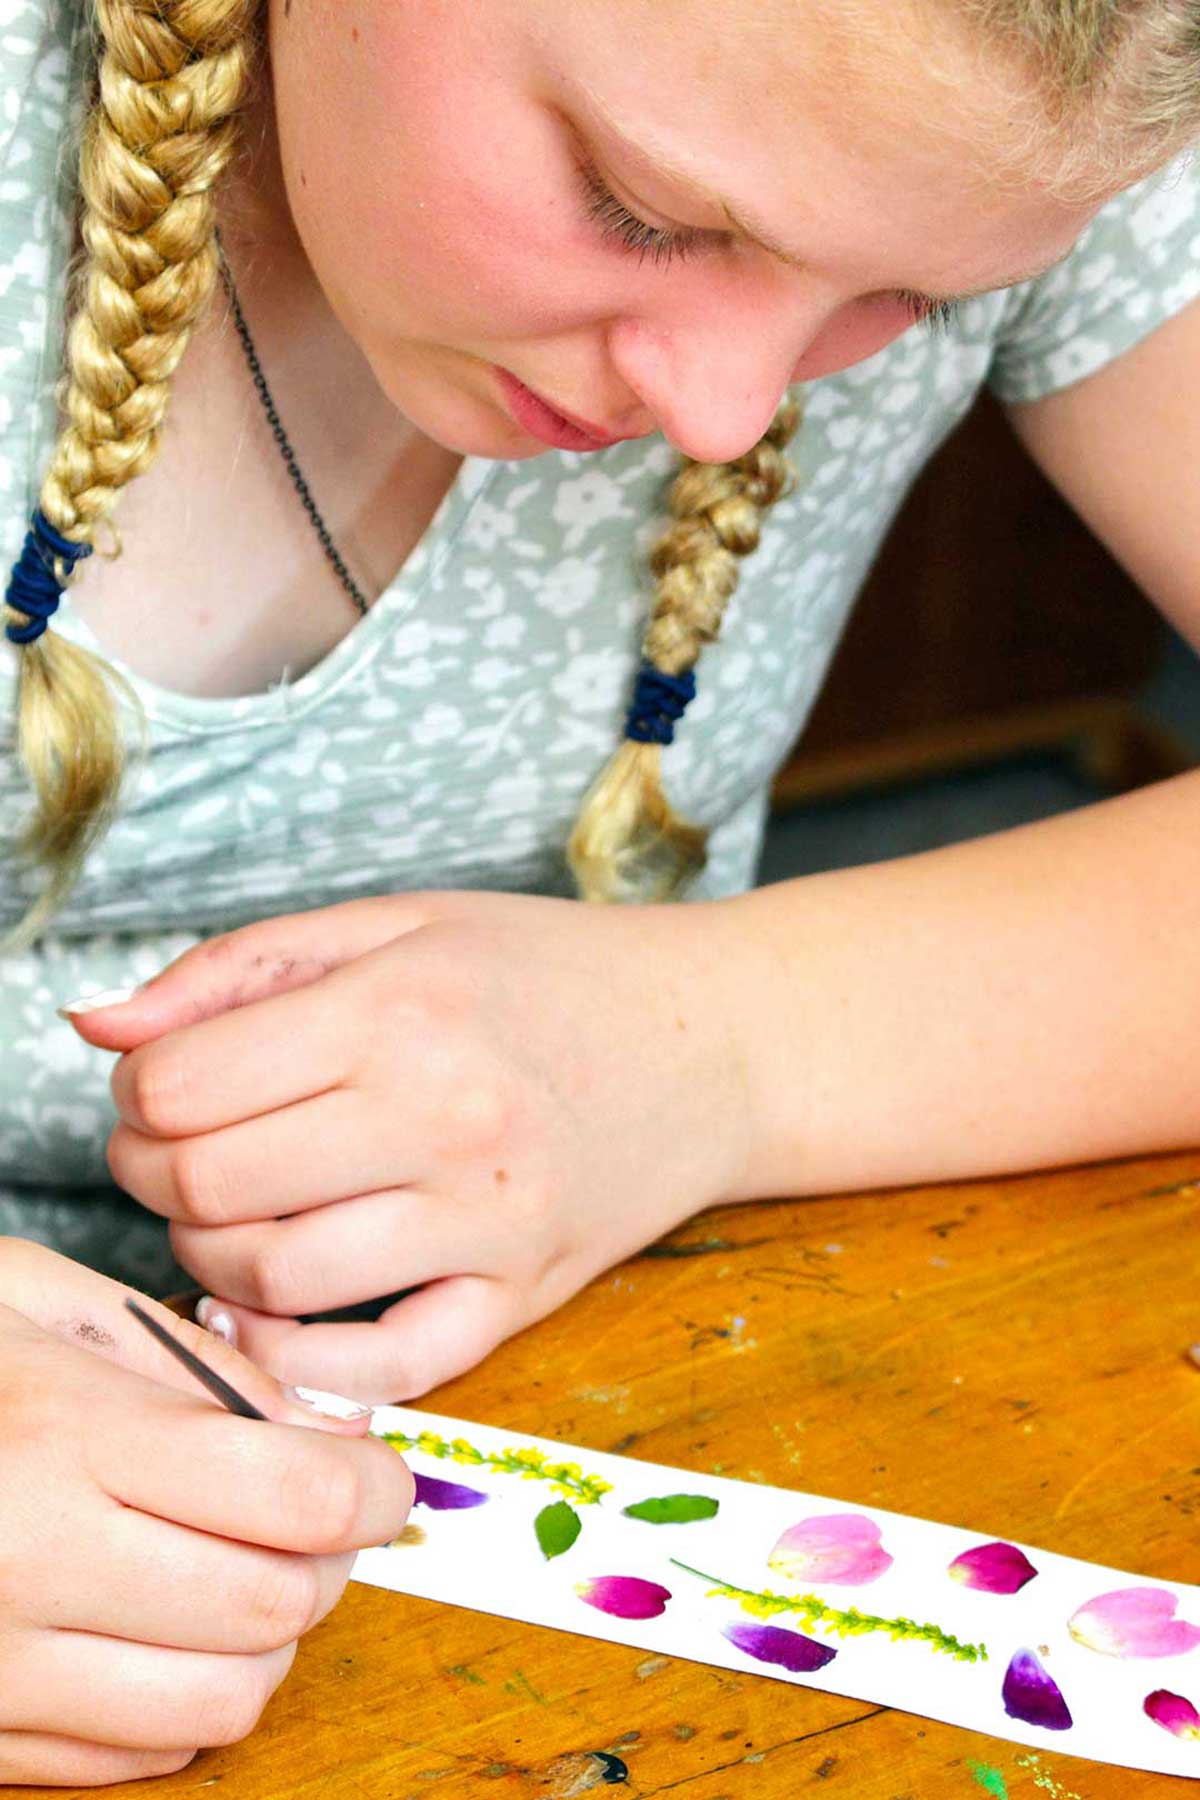 Young girl with blonde braids arranges flower petals on a strip of paper.